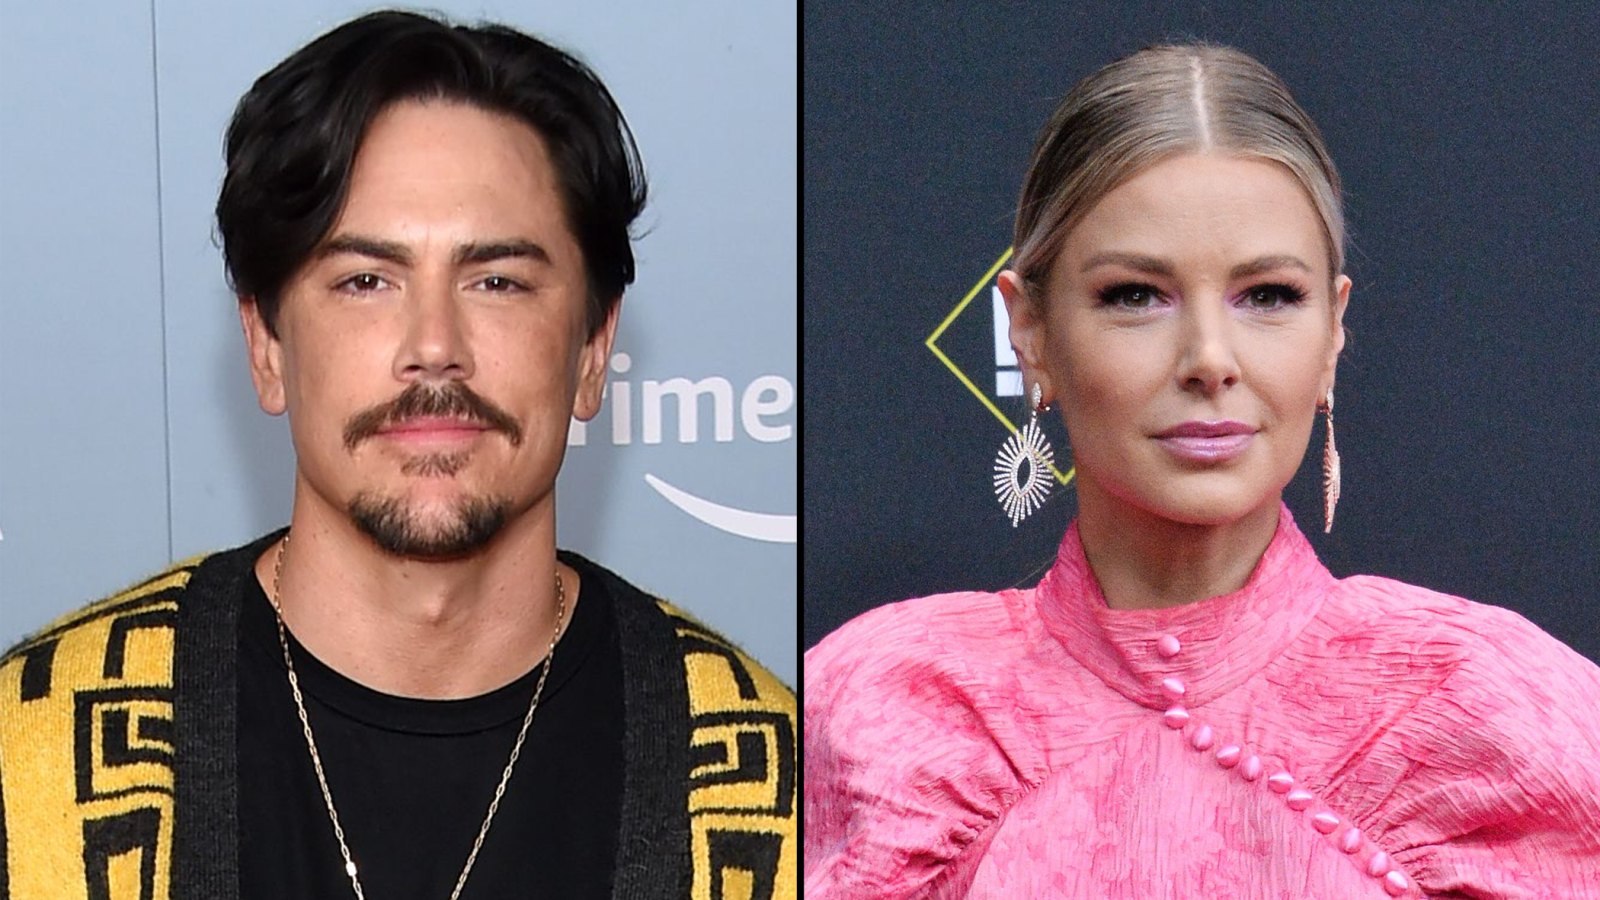 Tom Sandoval Claims Ariana Madix Brought Up Freezing Her Eggs After He Tried to End Relationship Amid Scandal: 'It Really Scared Me'